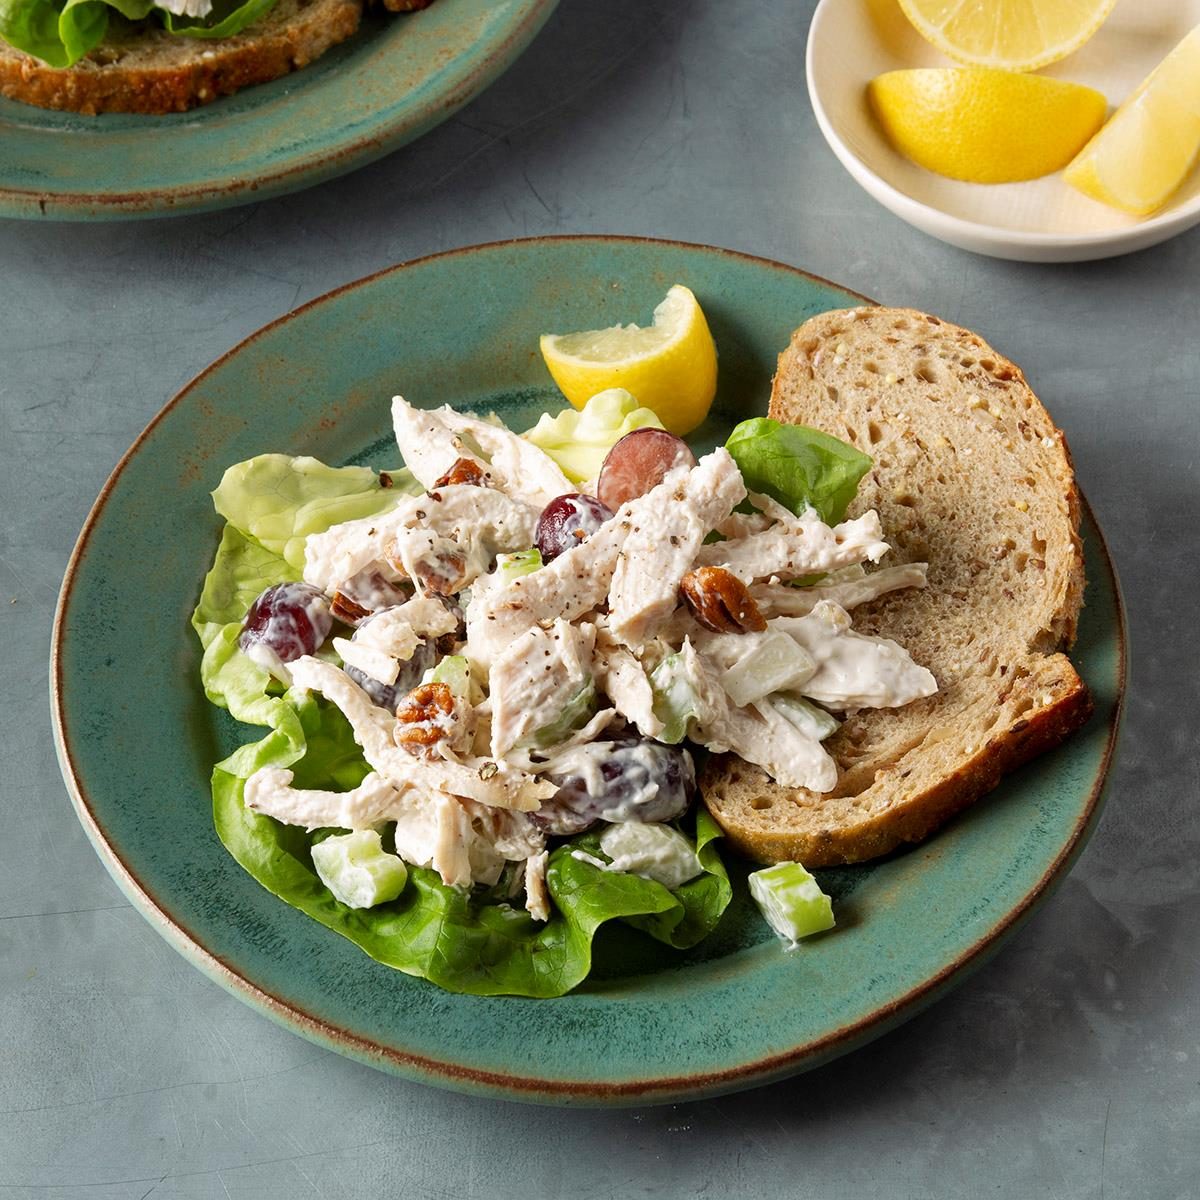 Easy Homemade Chicken Salad Recipe (for Sandwiches, Wraps & More)